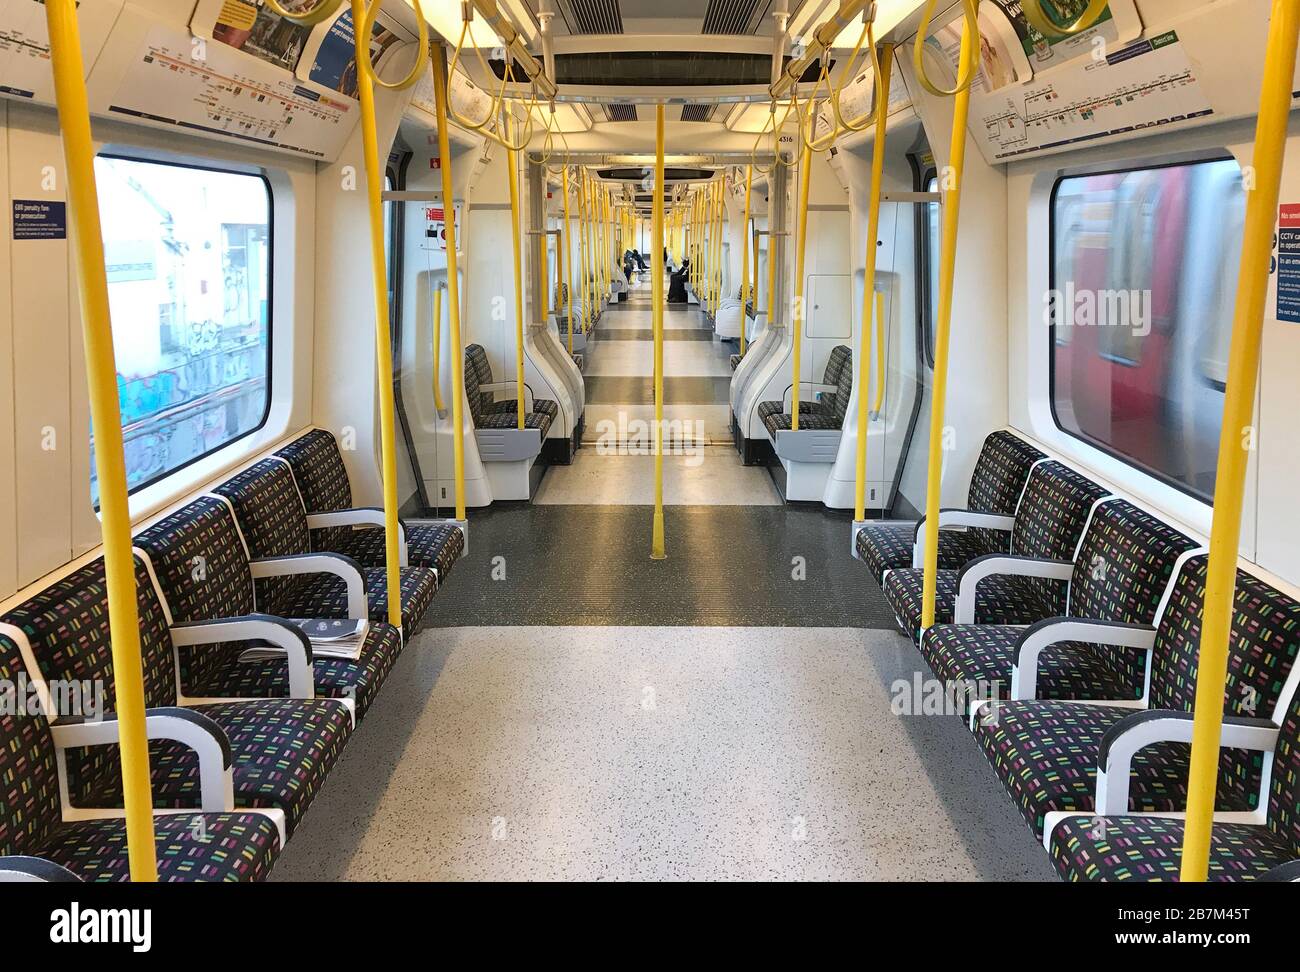 A sparsely-filled carriage on an Underground train in west London the day after Prime Minister Boris Johnson called on people to stay away from pubs, clubs and theatres, work from home if possible and avoid all non-essential contacts and travel in order to reduce the impact of the coronavirus pandemic. Stock Photo